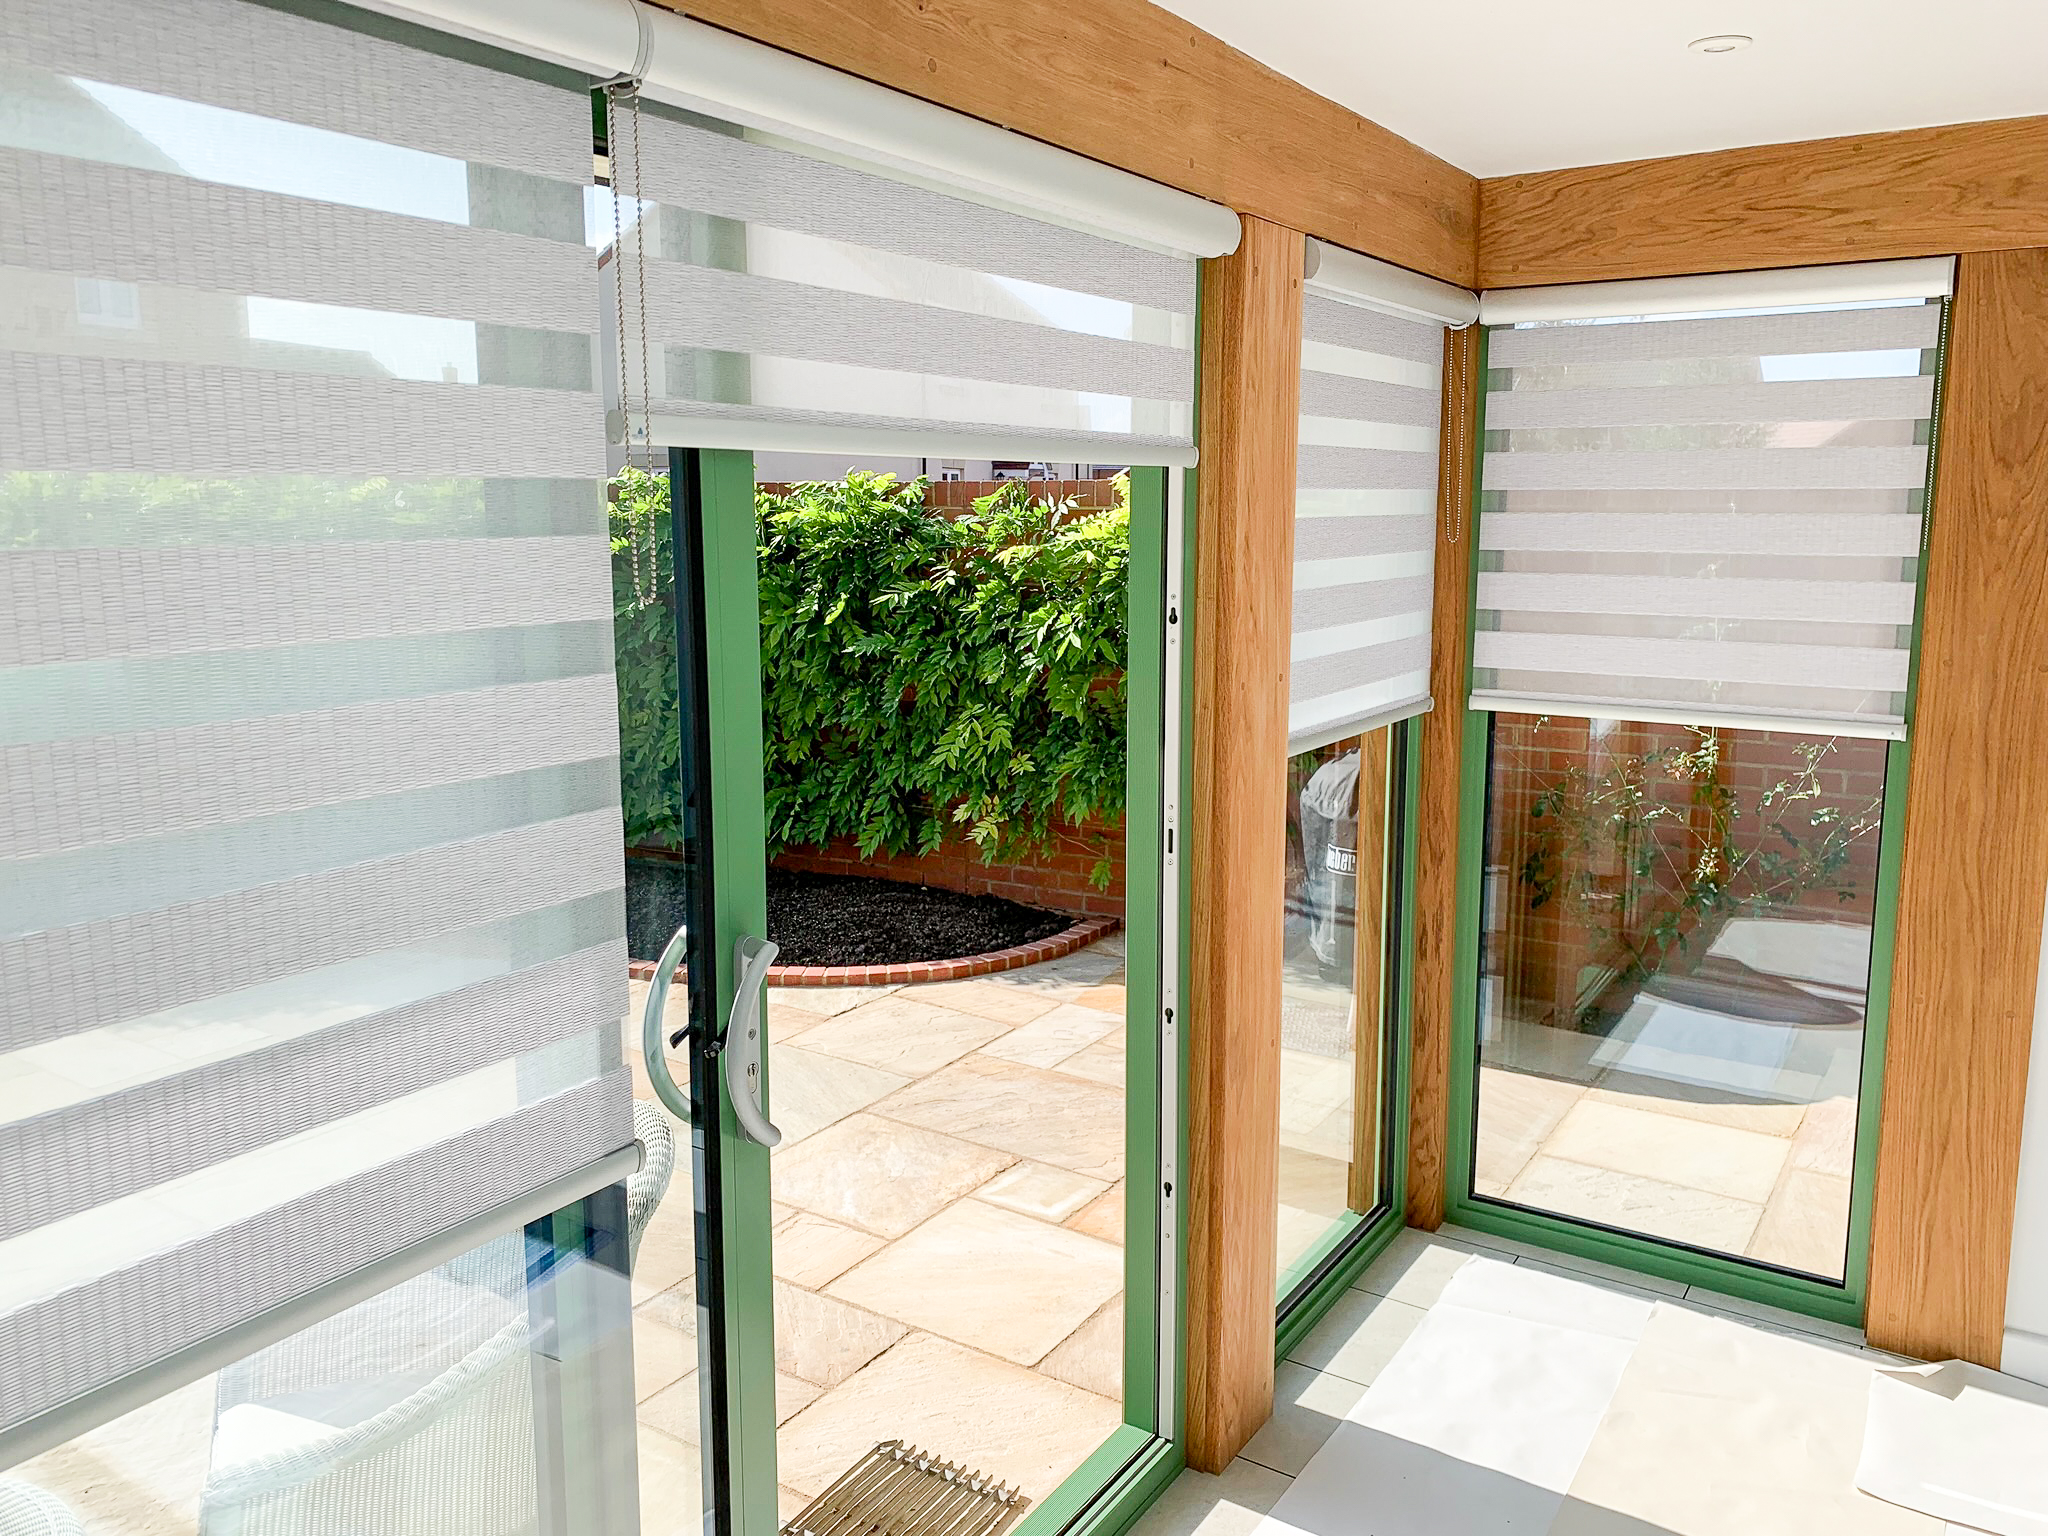 Image of child safe Duorol blinds installed by Winchester Blinds